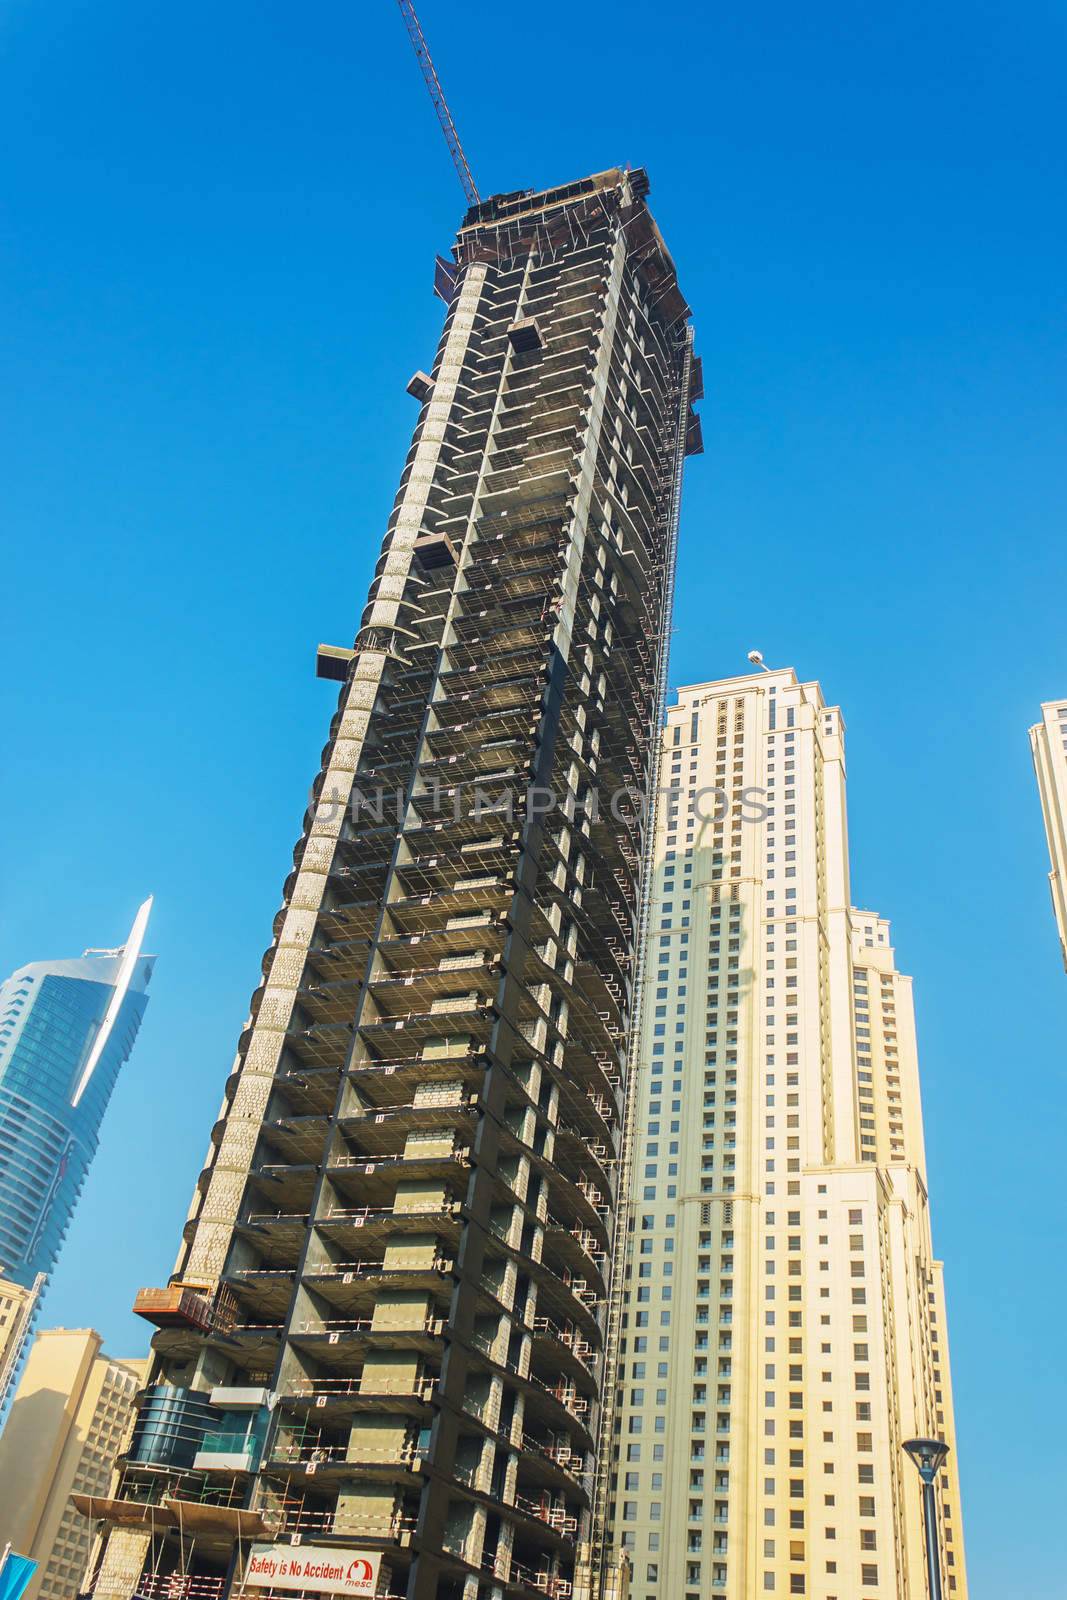 DUBAI, UAE - NOVEMBER 13: High rise buildings and streets nov 13. 2012  in Dubai, UAE. Skyscraper under construction in foreground. Dubai was the fastest developing city in the world between 2002 and 2008.